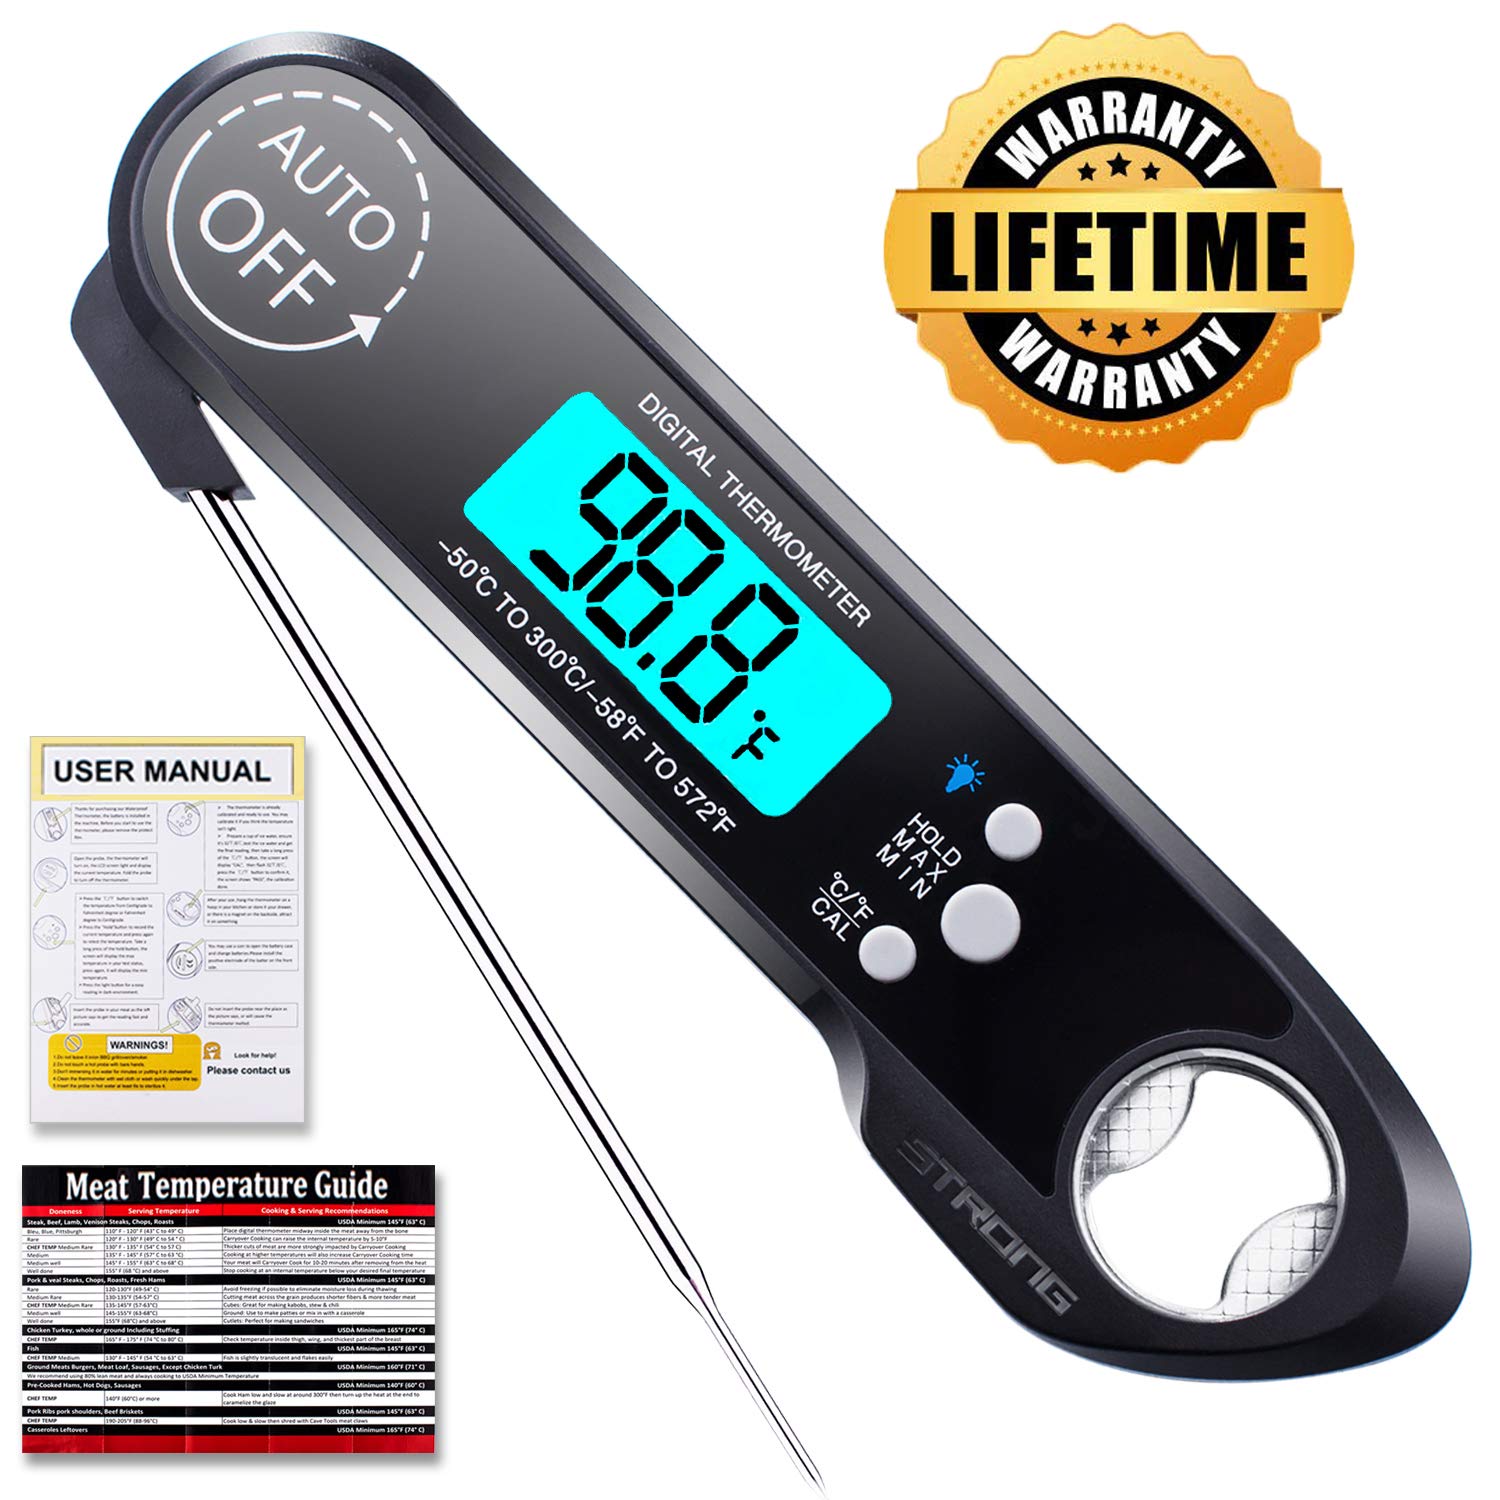 waterproof Meat thermometer